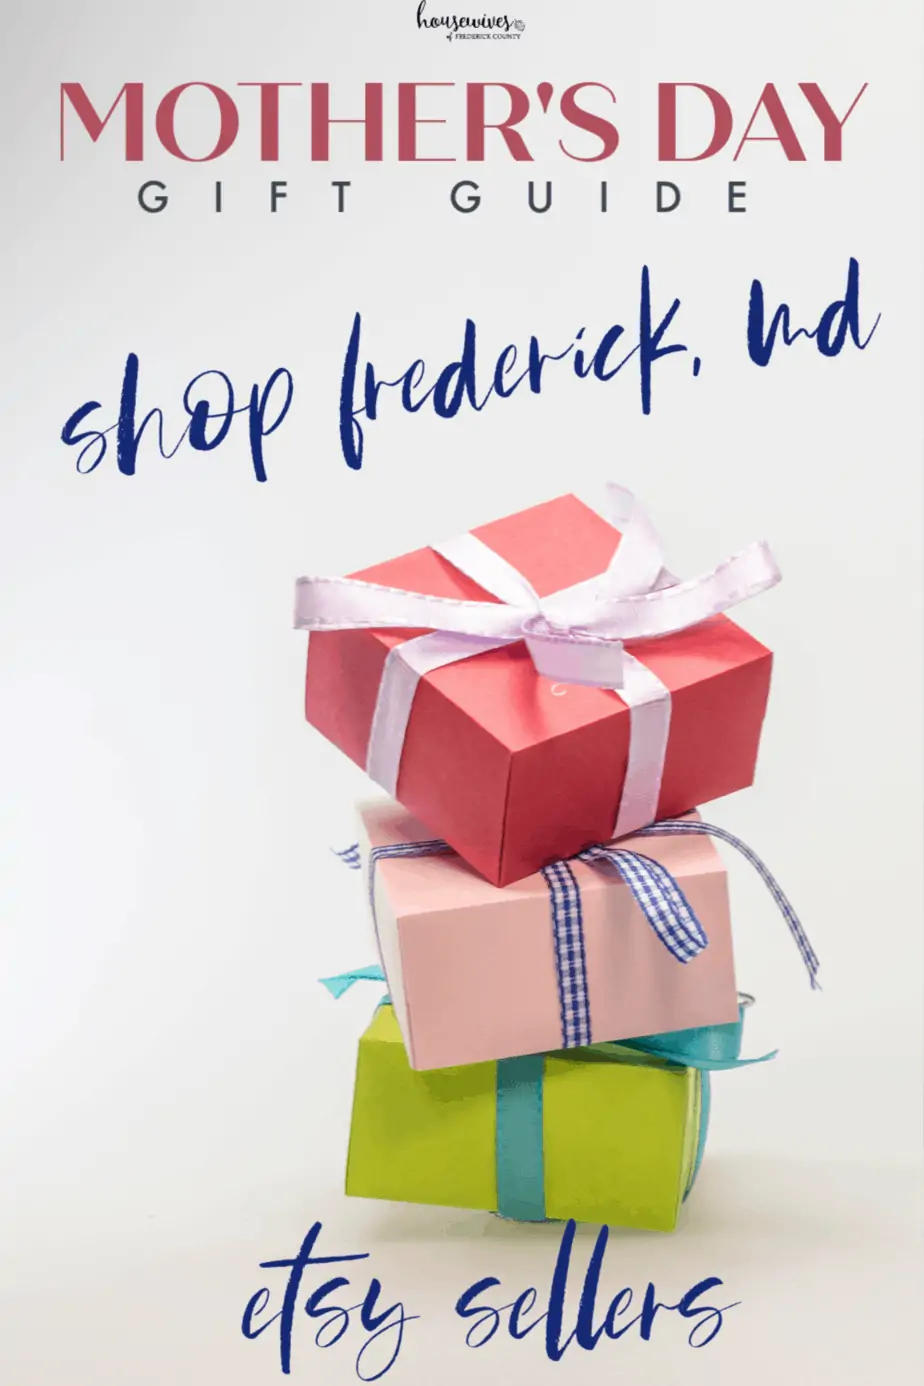 Mother's Day Gift Guide: Shop Frederick Md Etsy Sellers